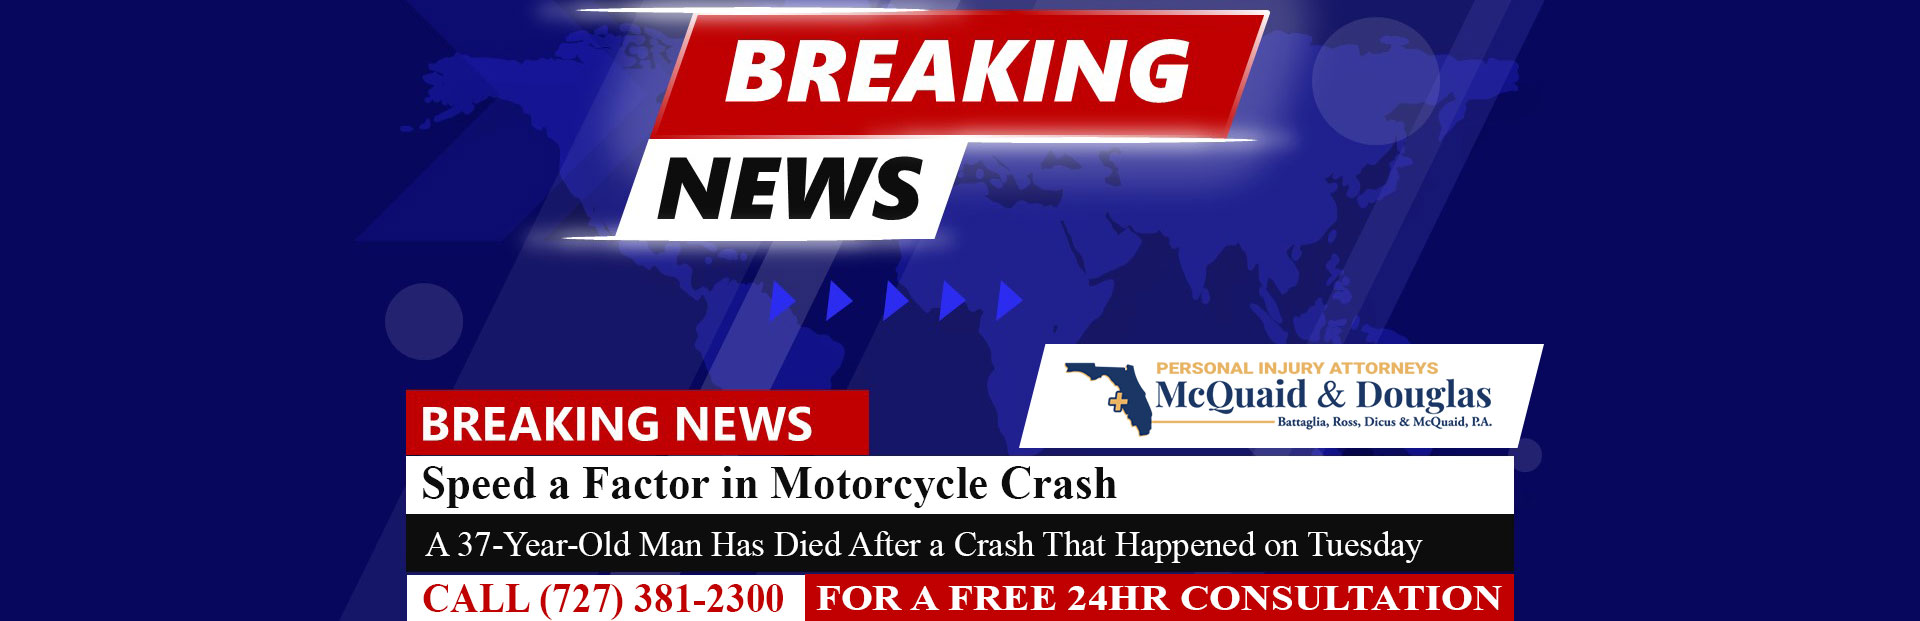 [02-02-24] Speed a Factor in Motorcycle Crash That Claimed Life of 37-Year-Old Man